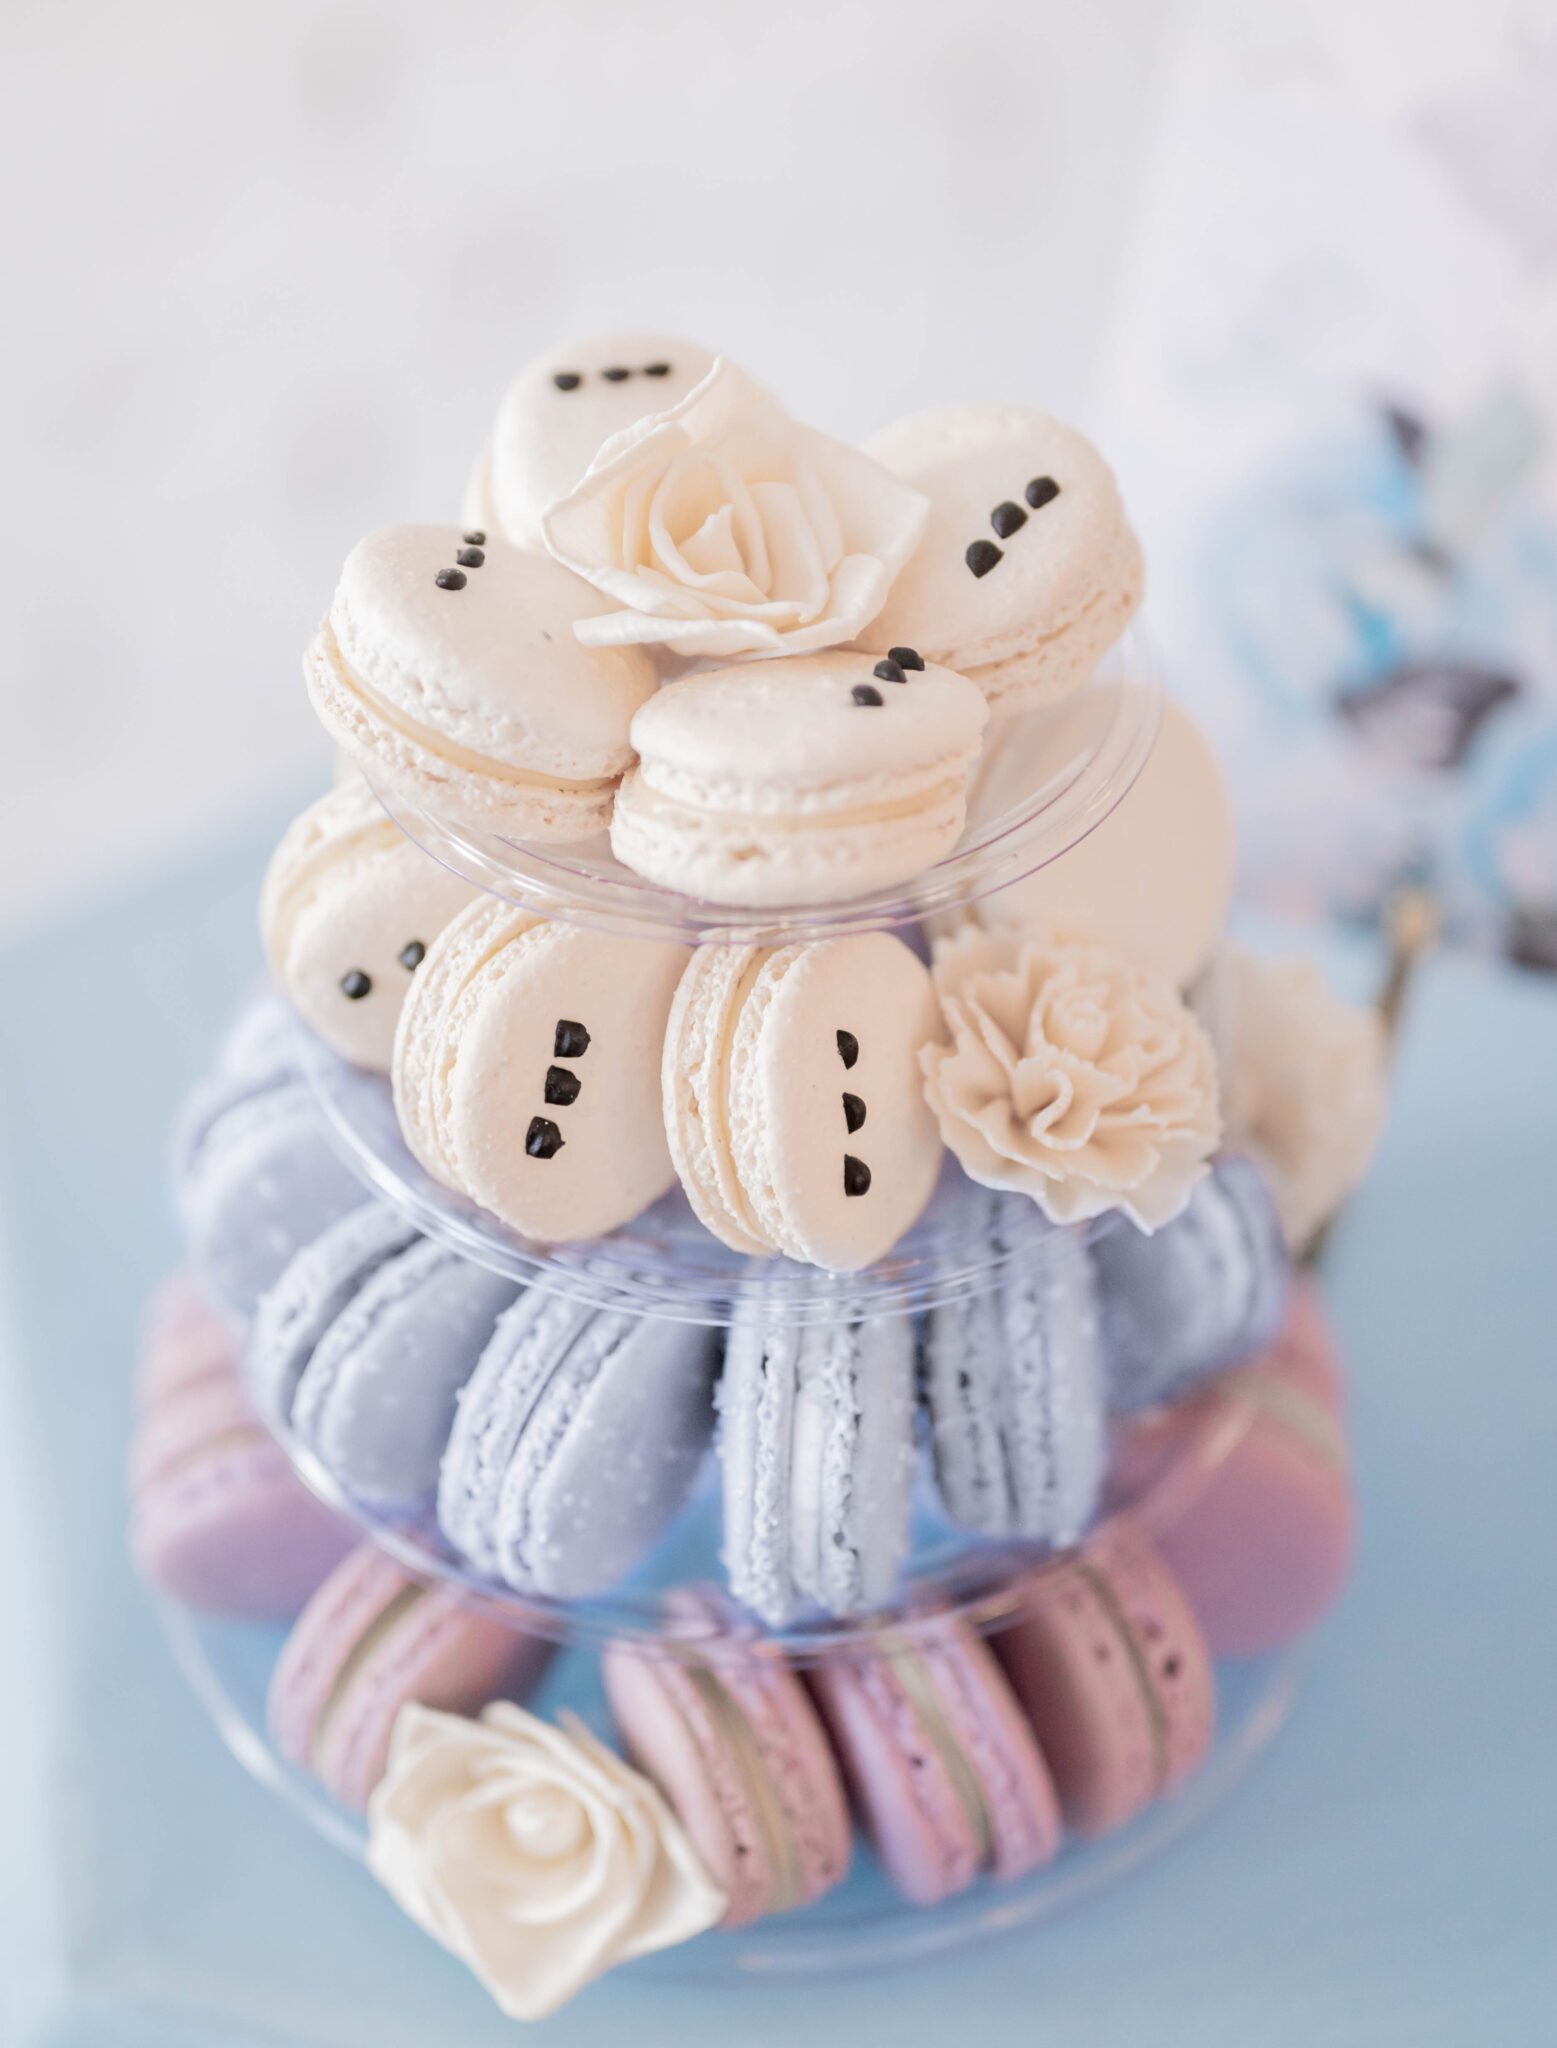 Tiered display of macarons in purple, baby blue and creamy white decorated with white florals, french macarons are a unique wedding cake alternative, purple and baby blue colour palette ideas